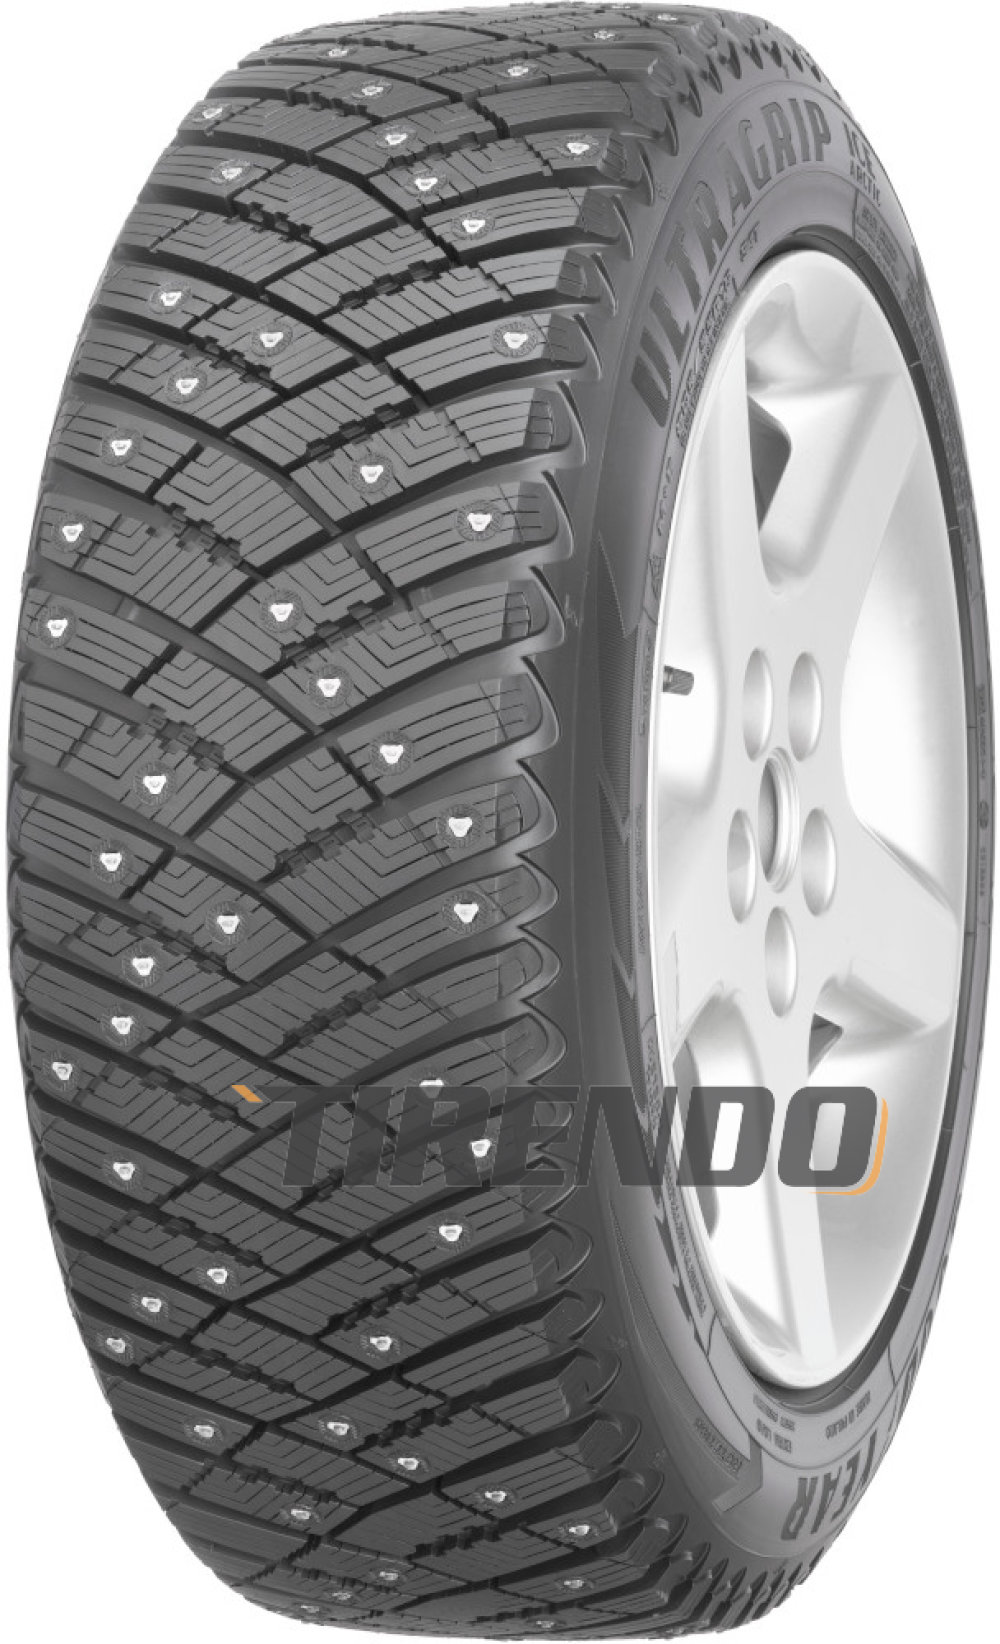 Image of Goodyear Ultra Grip Ice Arctic ( 185/55 R15 86T XL, pneumatico chiodato )